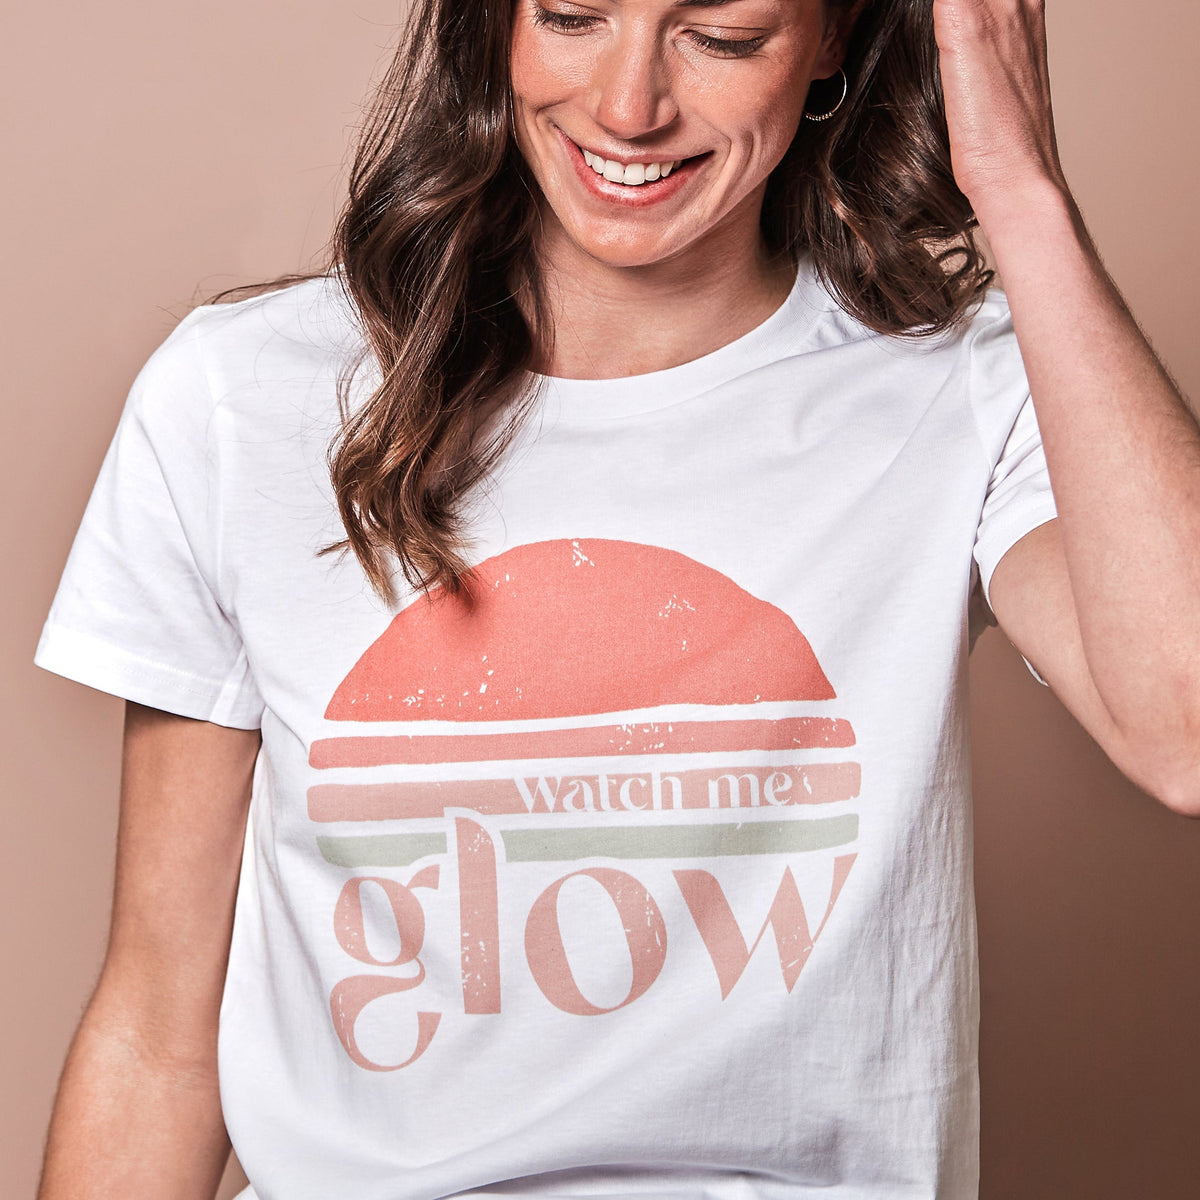 Brown haired girl wearing white tee with slogan &quot;Watch me glow&quot;